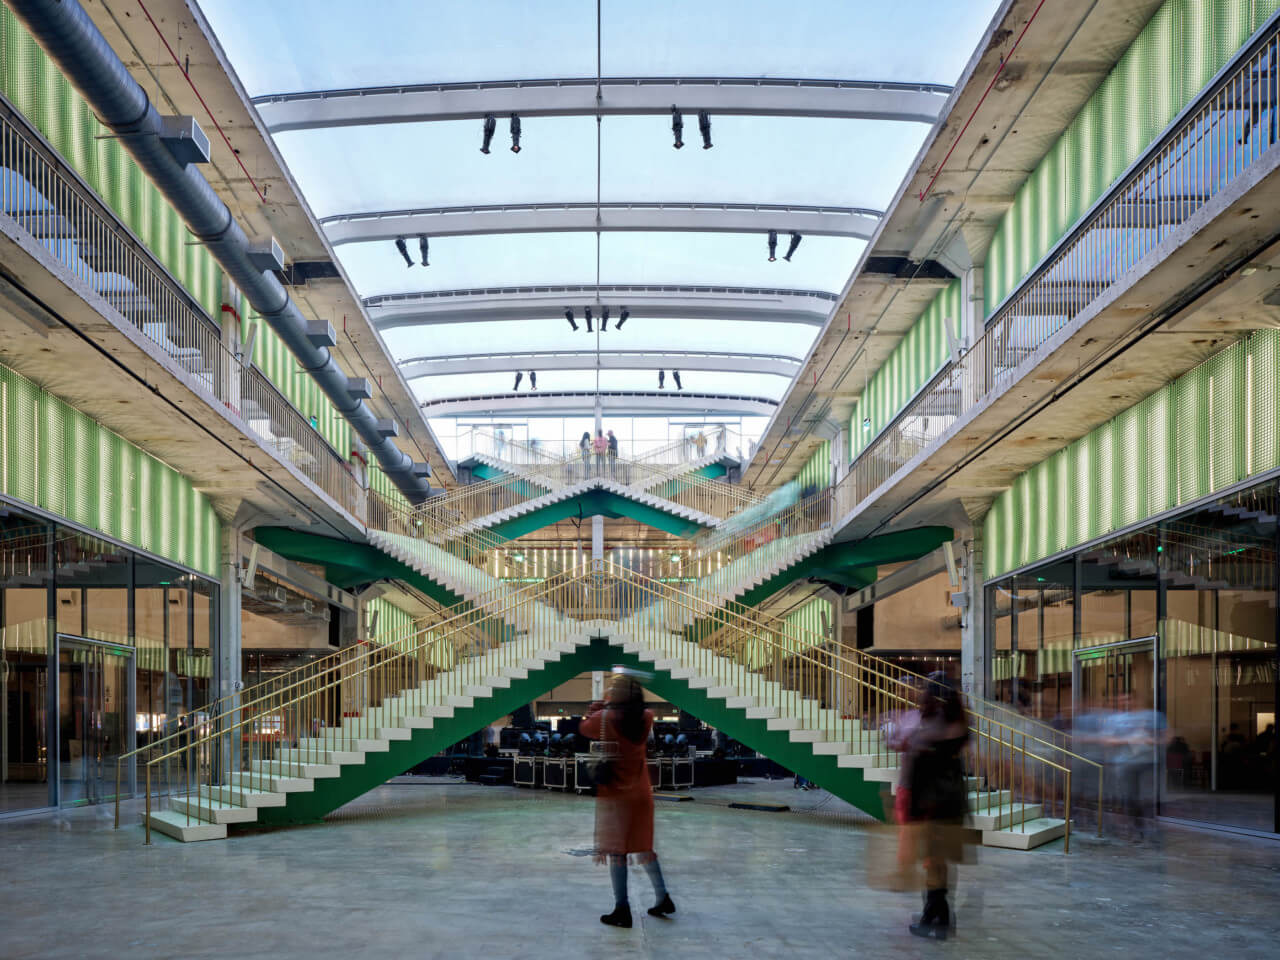 a massive criss-crossing staircase in a former industrial space